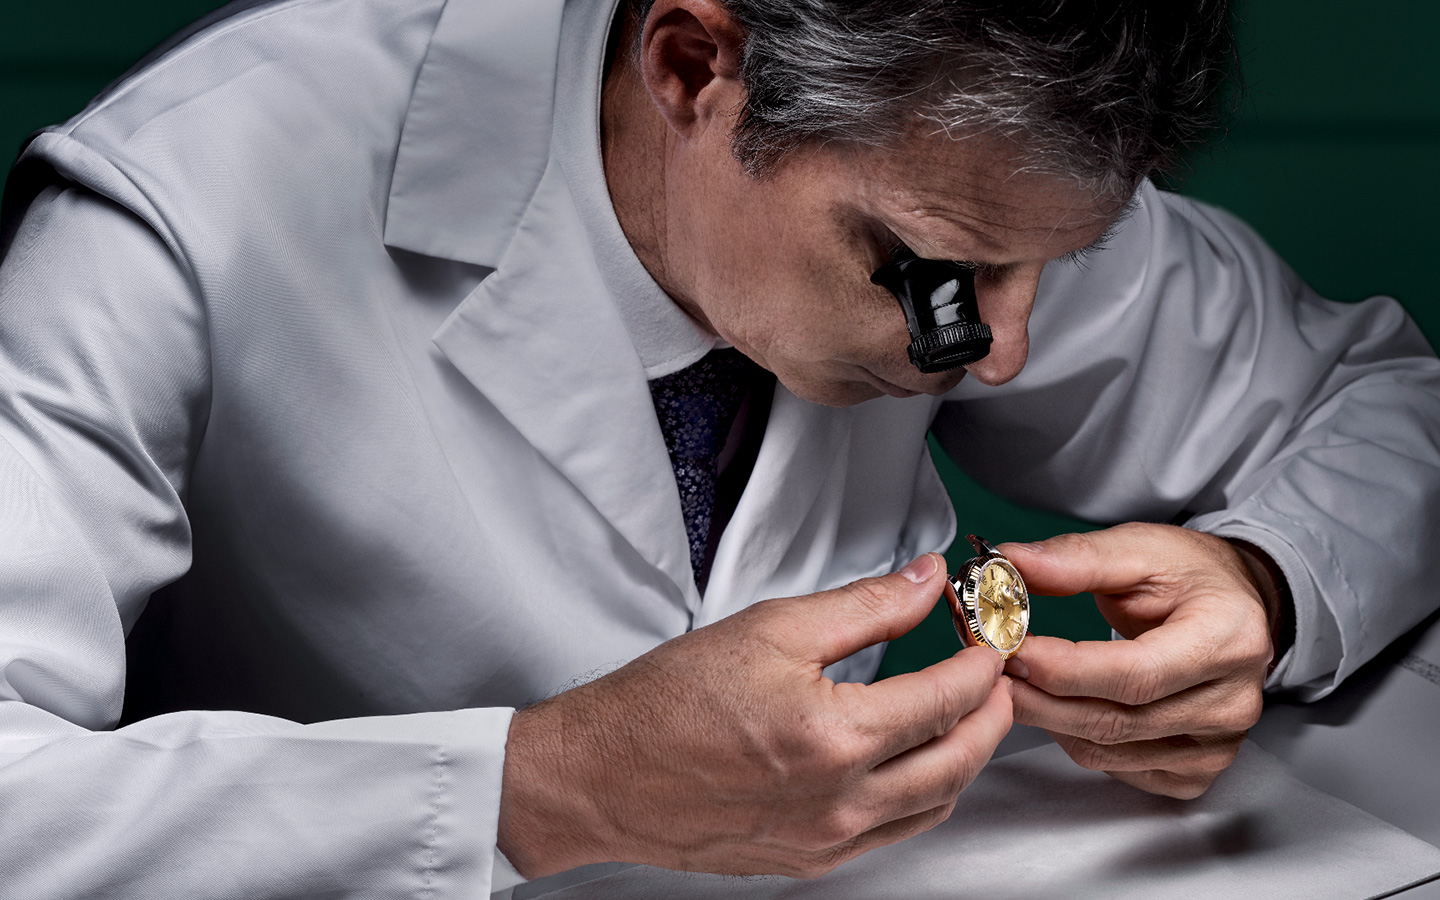 Rolex servicing at Orr's Jewelers in Pittsburgh, PA